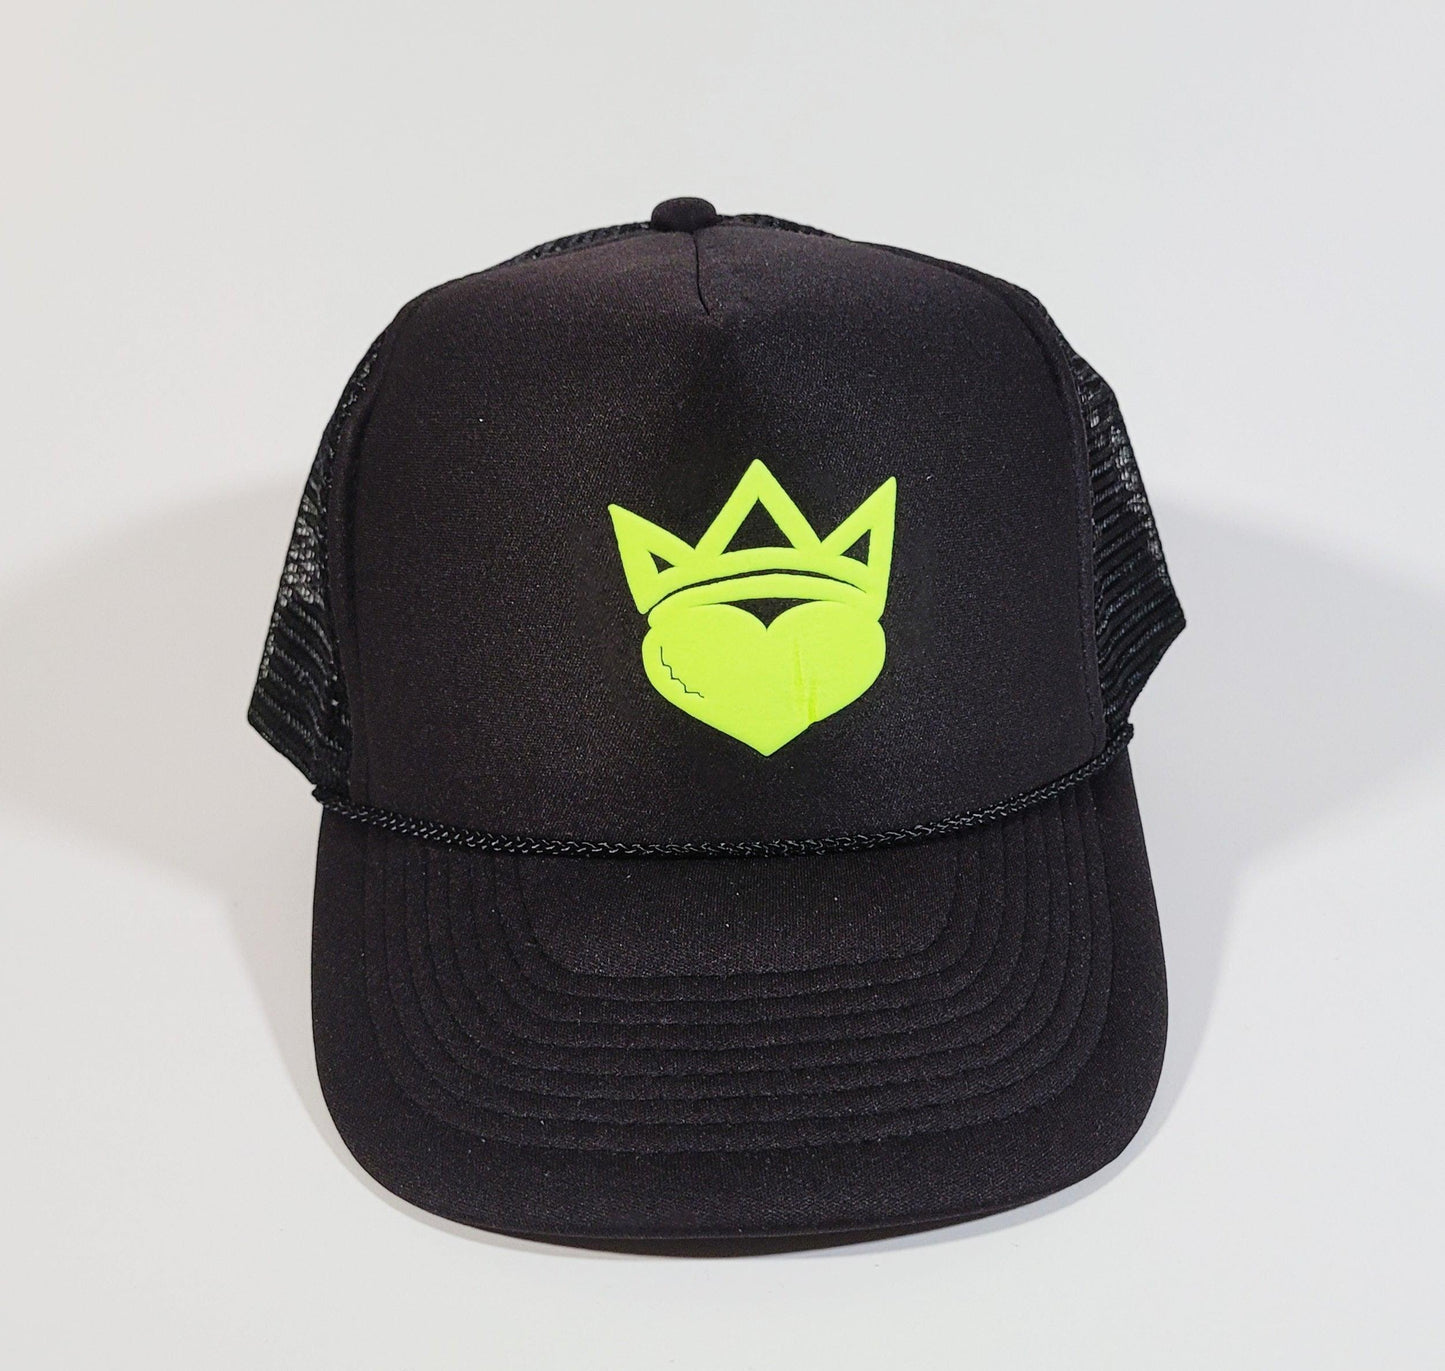 Black & Fluorescent Yellow "King/Queen Of Hearts" Trucker Hat - Official Crown Store